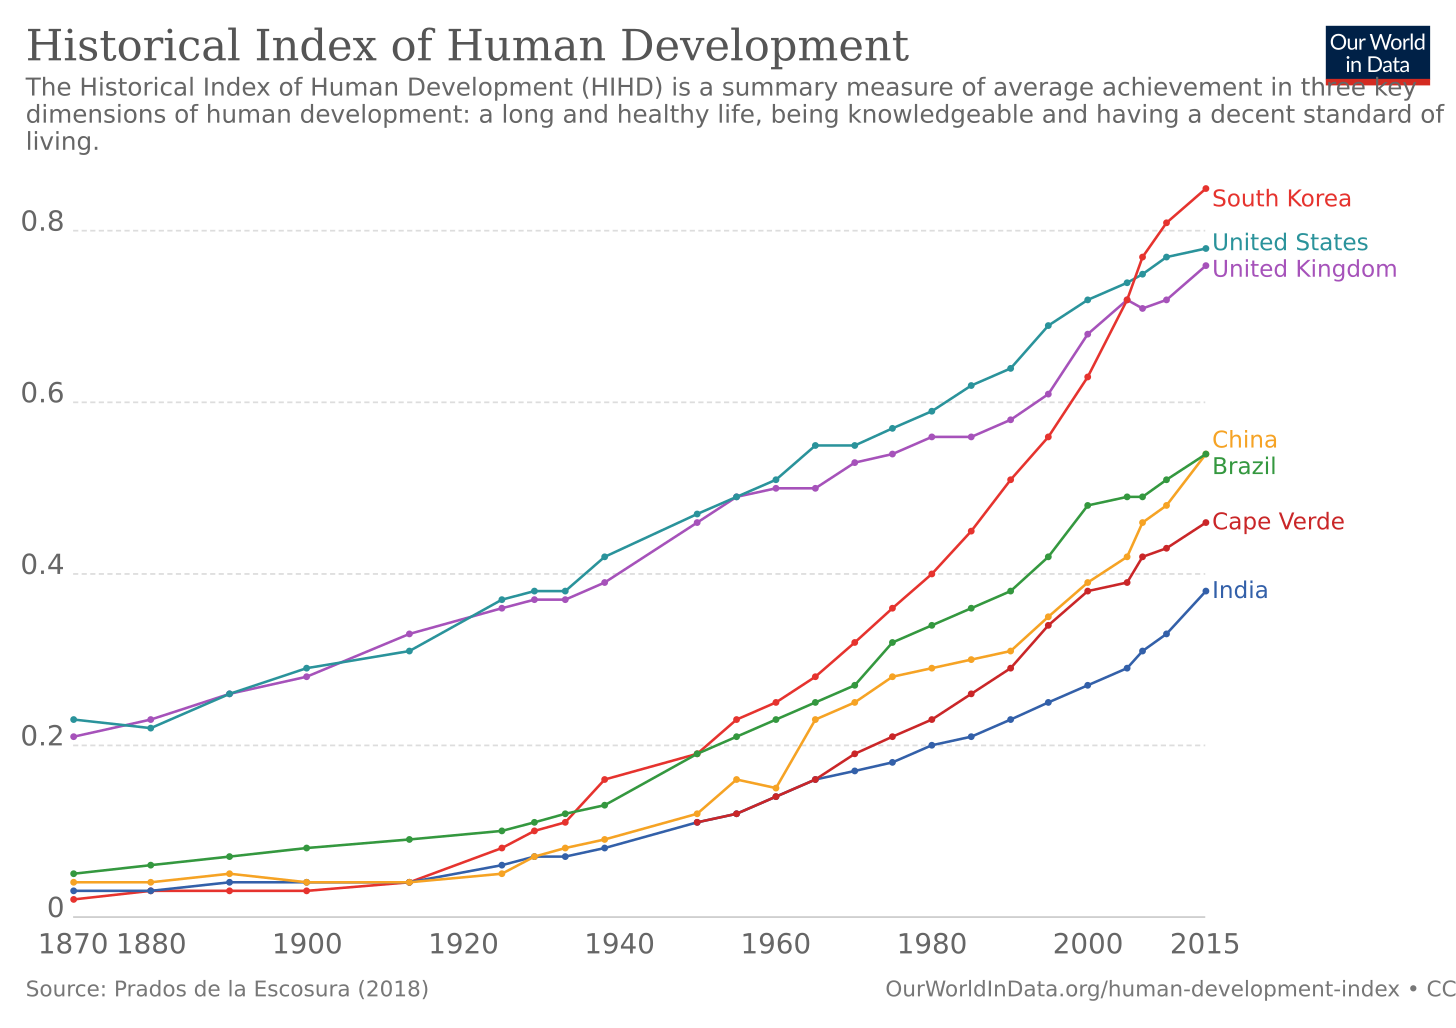 Human Development Index (HDI) - Our World in Data